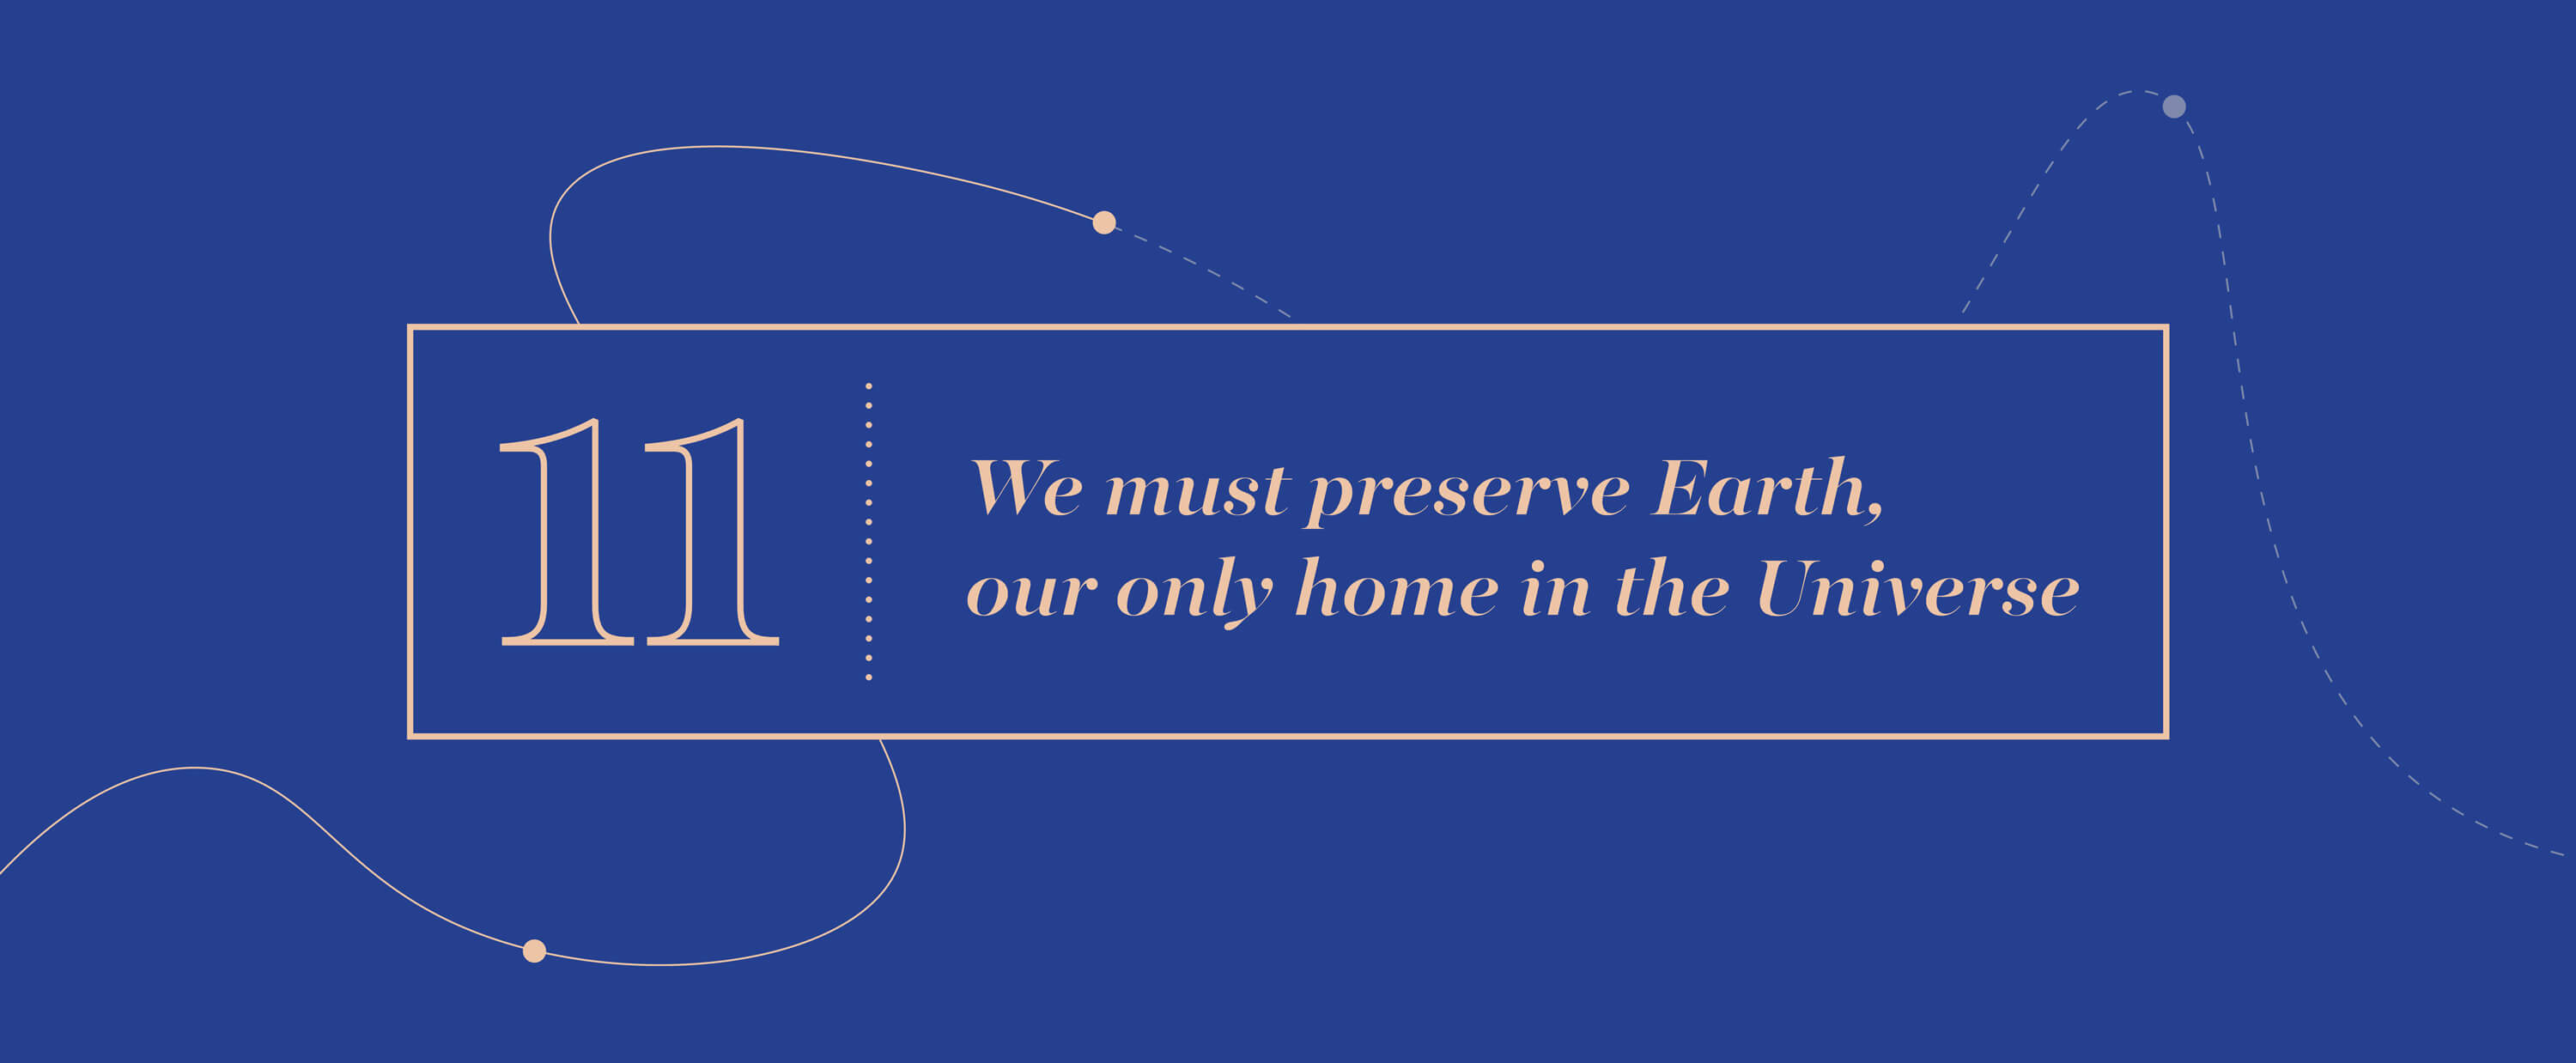 Big Idea 11 - We must preserve Earth, our only home in the Universe